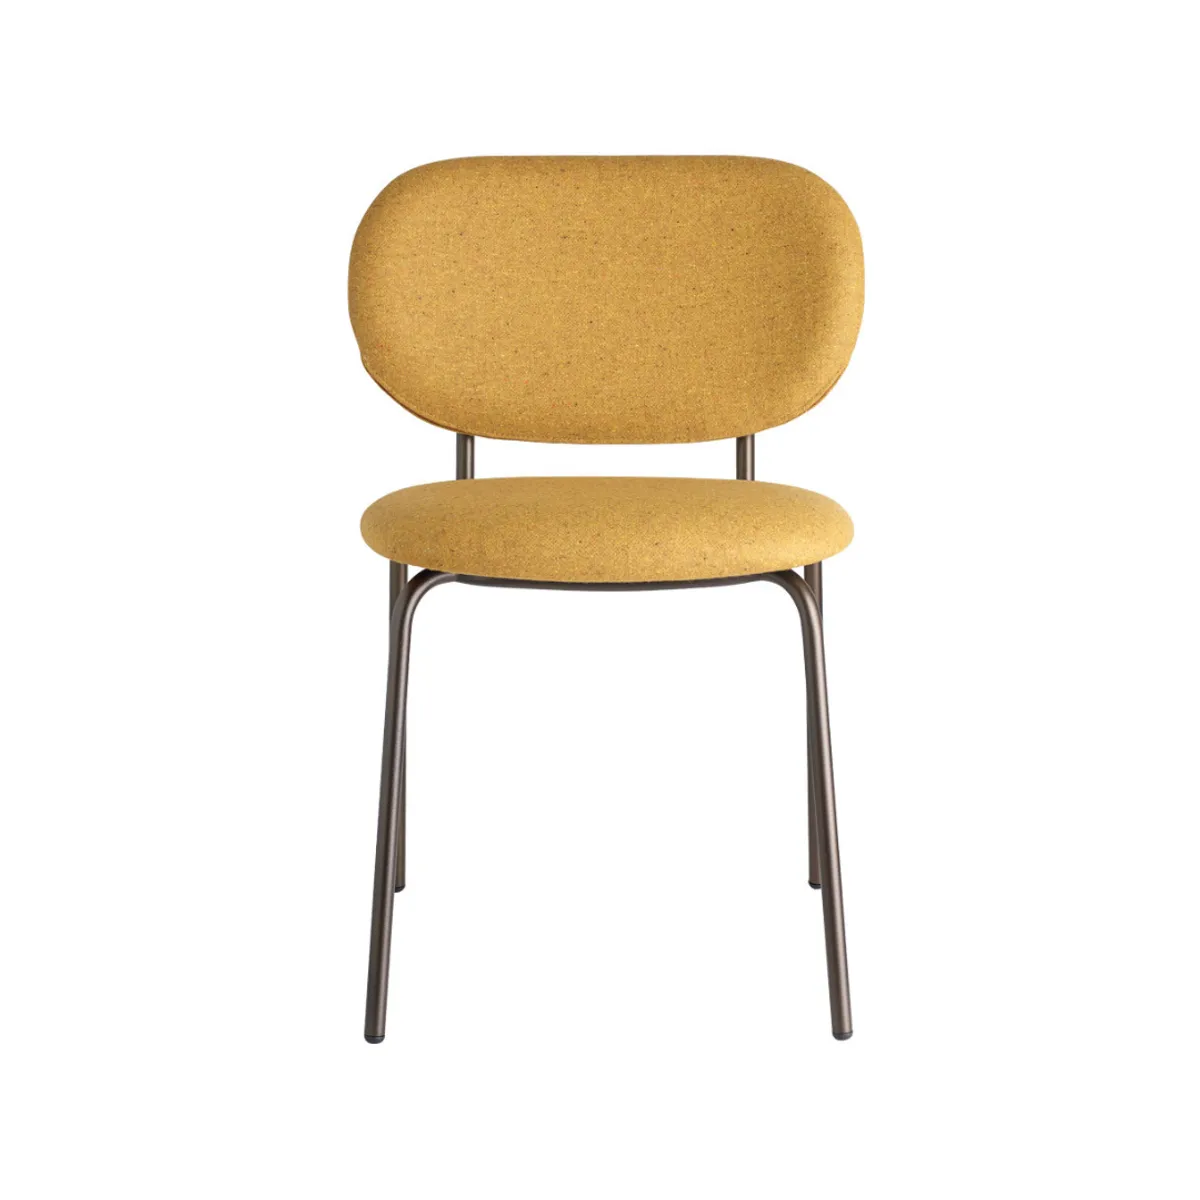 Layla soft side chair 1